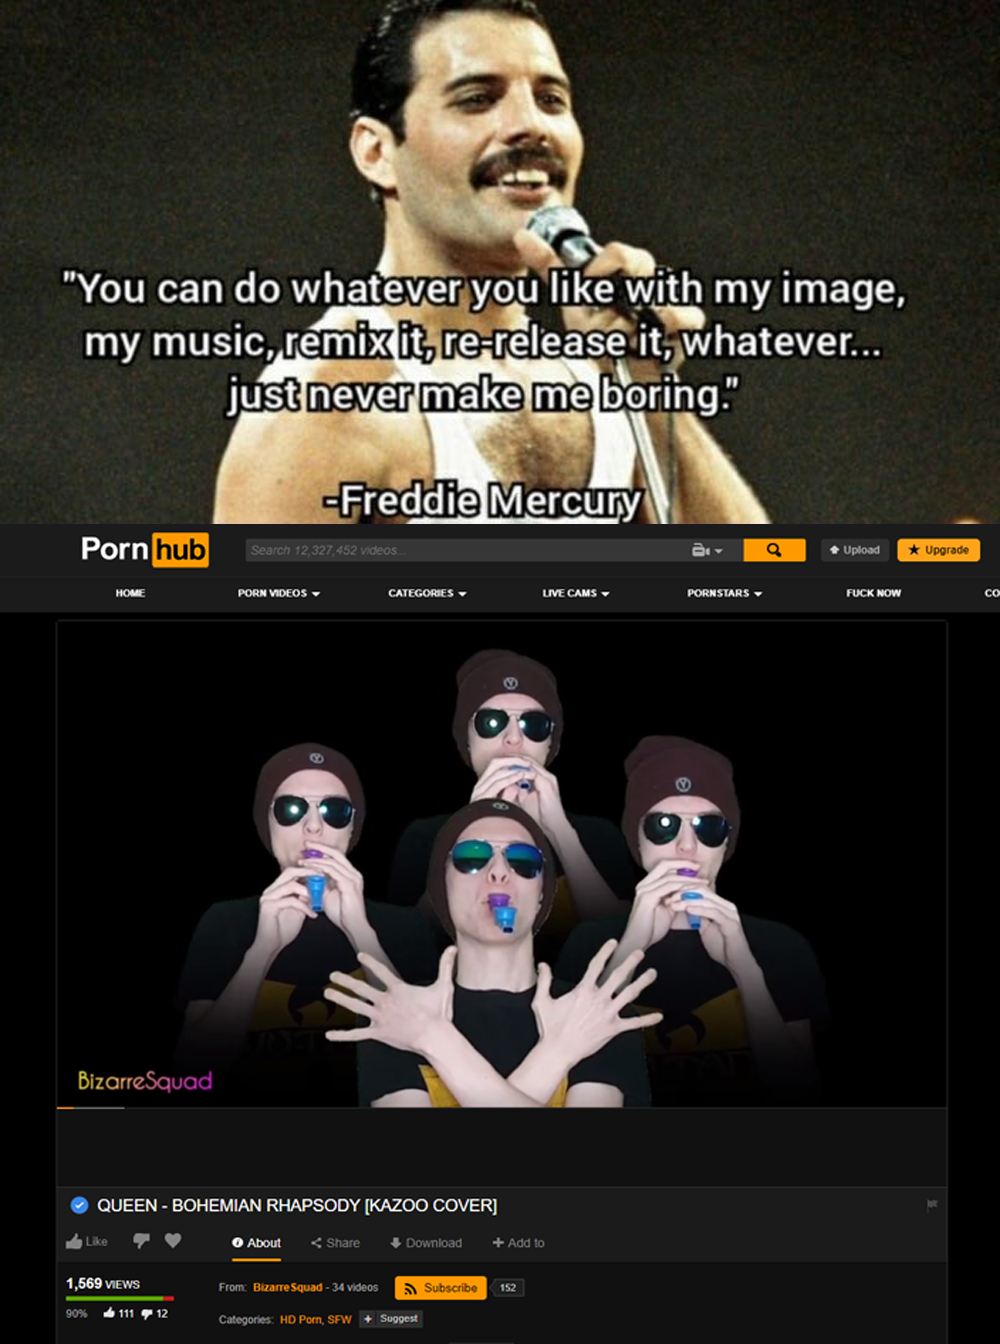 website - "You can do whatever you with my image, my music, remix it, rerelease it, whatever... just never make me boring." Freddie Mercury Porn hub Kami Become Squad Queen Bohemian Rhapsodybazoo Cover D 1.6